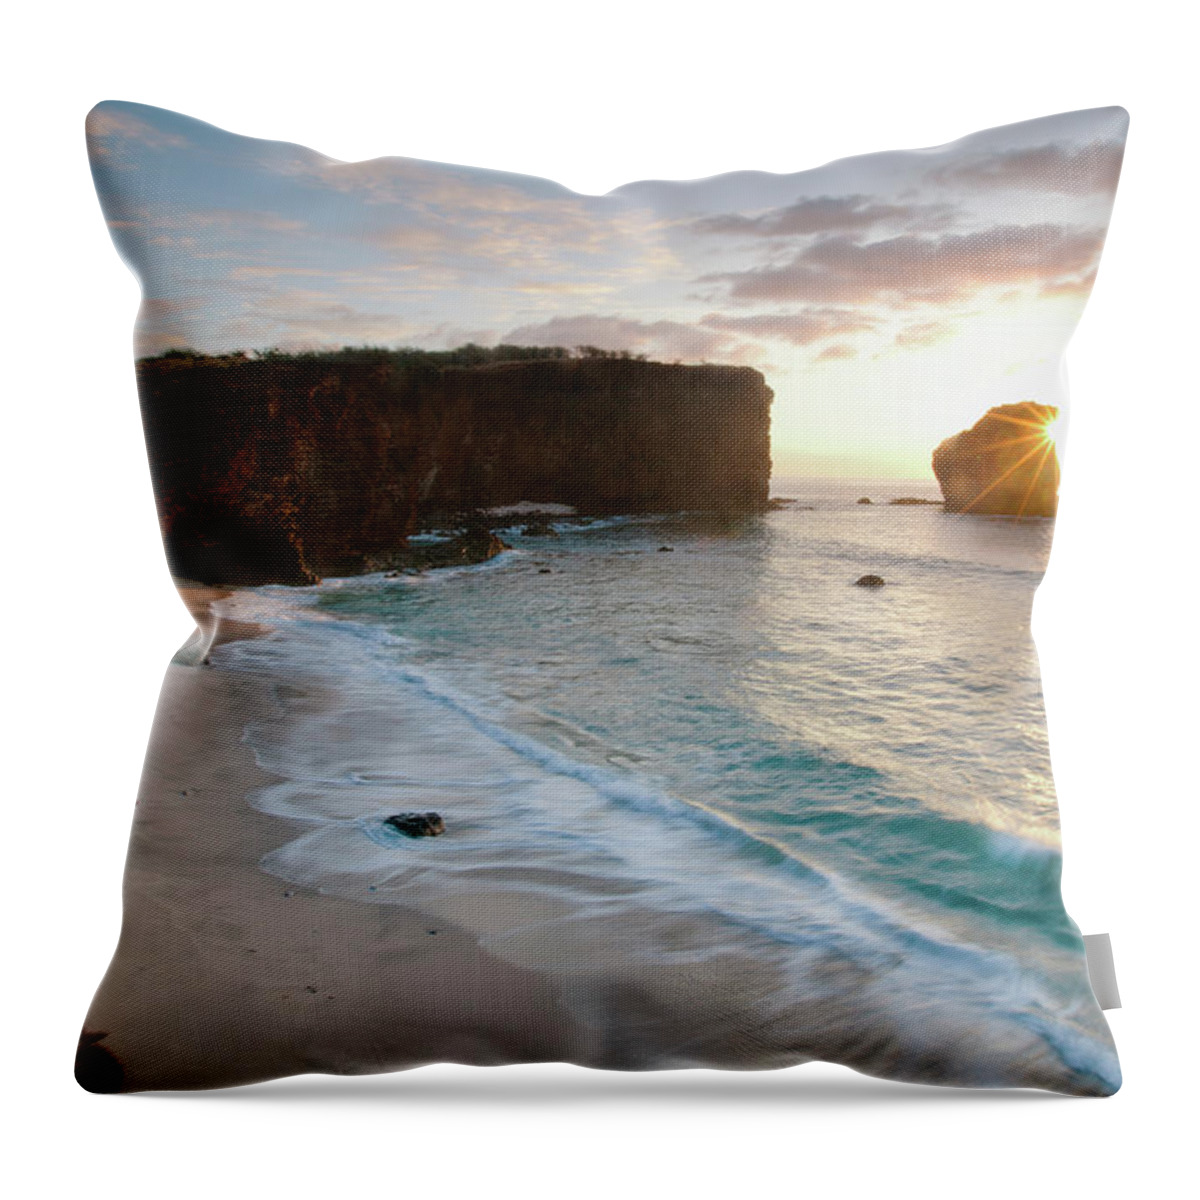 Scenics Throw Pillow featuring the photograph Lanai Sunset Resort Beach by M Swiet Productions